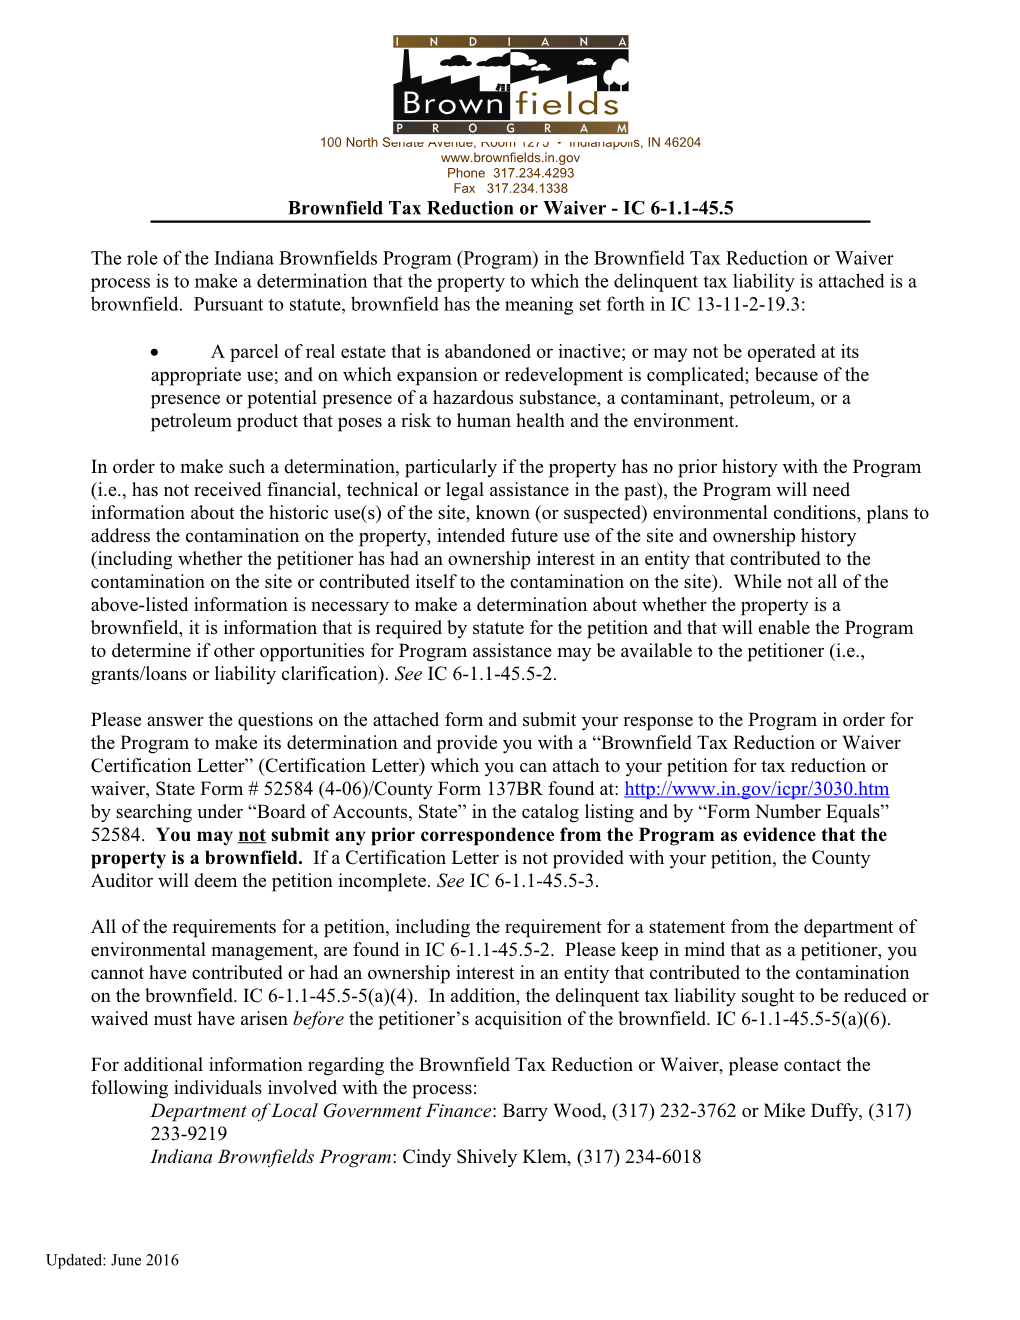 Brownfield Tax Reduction Or Waiver - IC 6-1.1-45.5